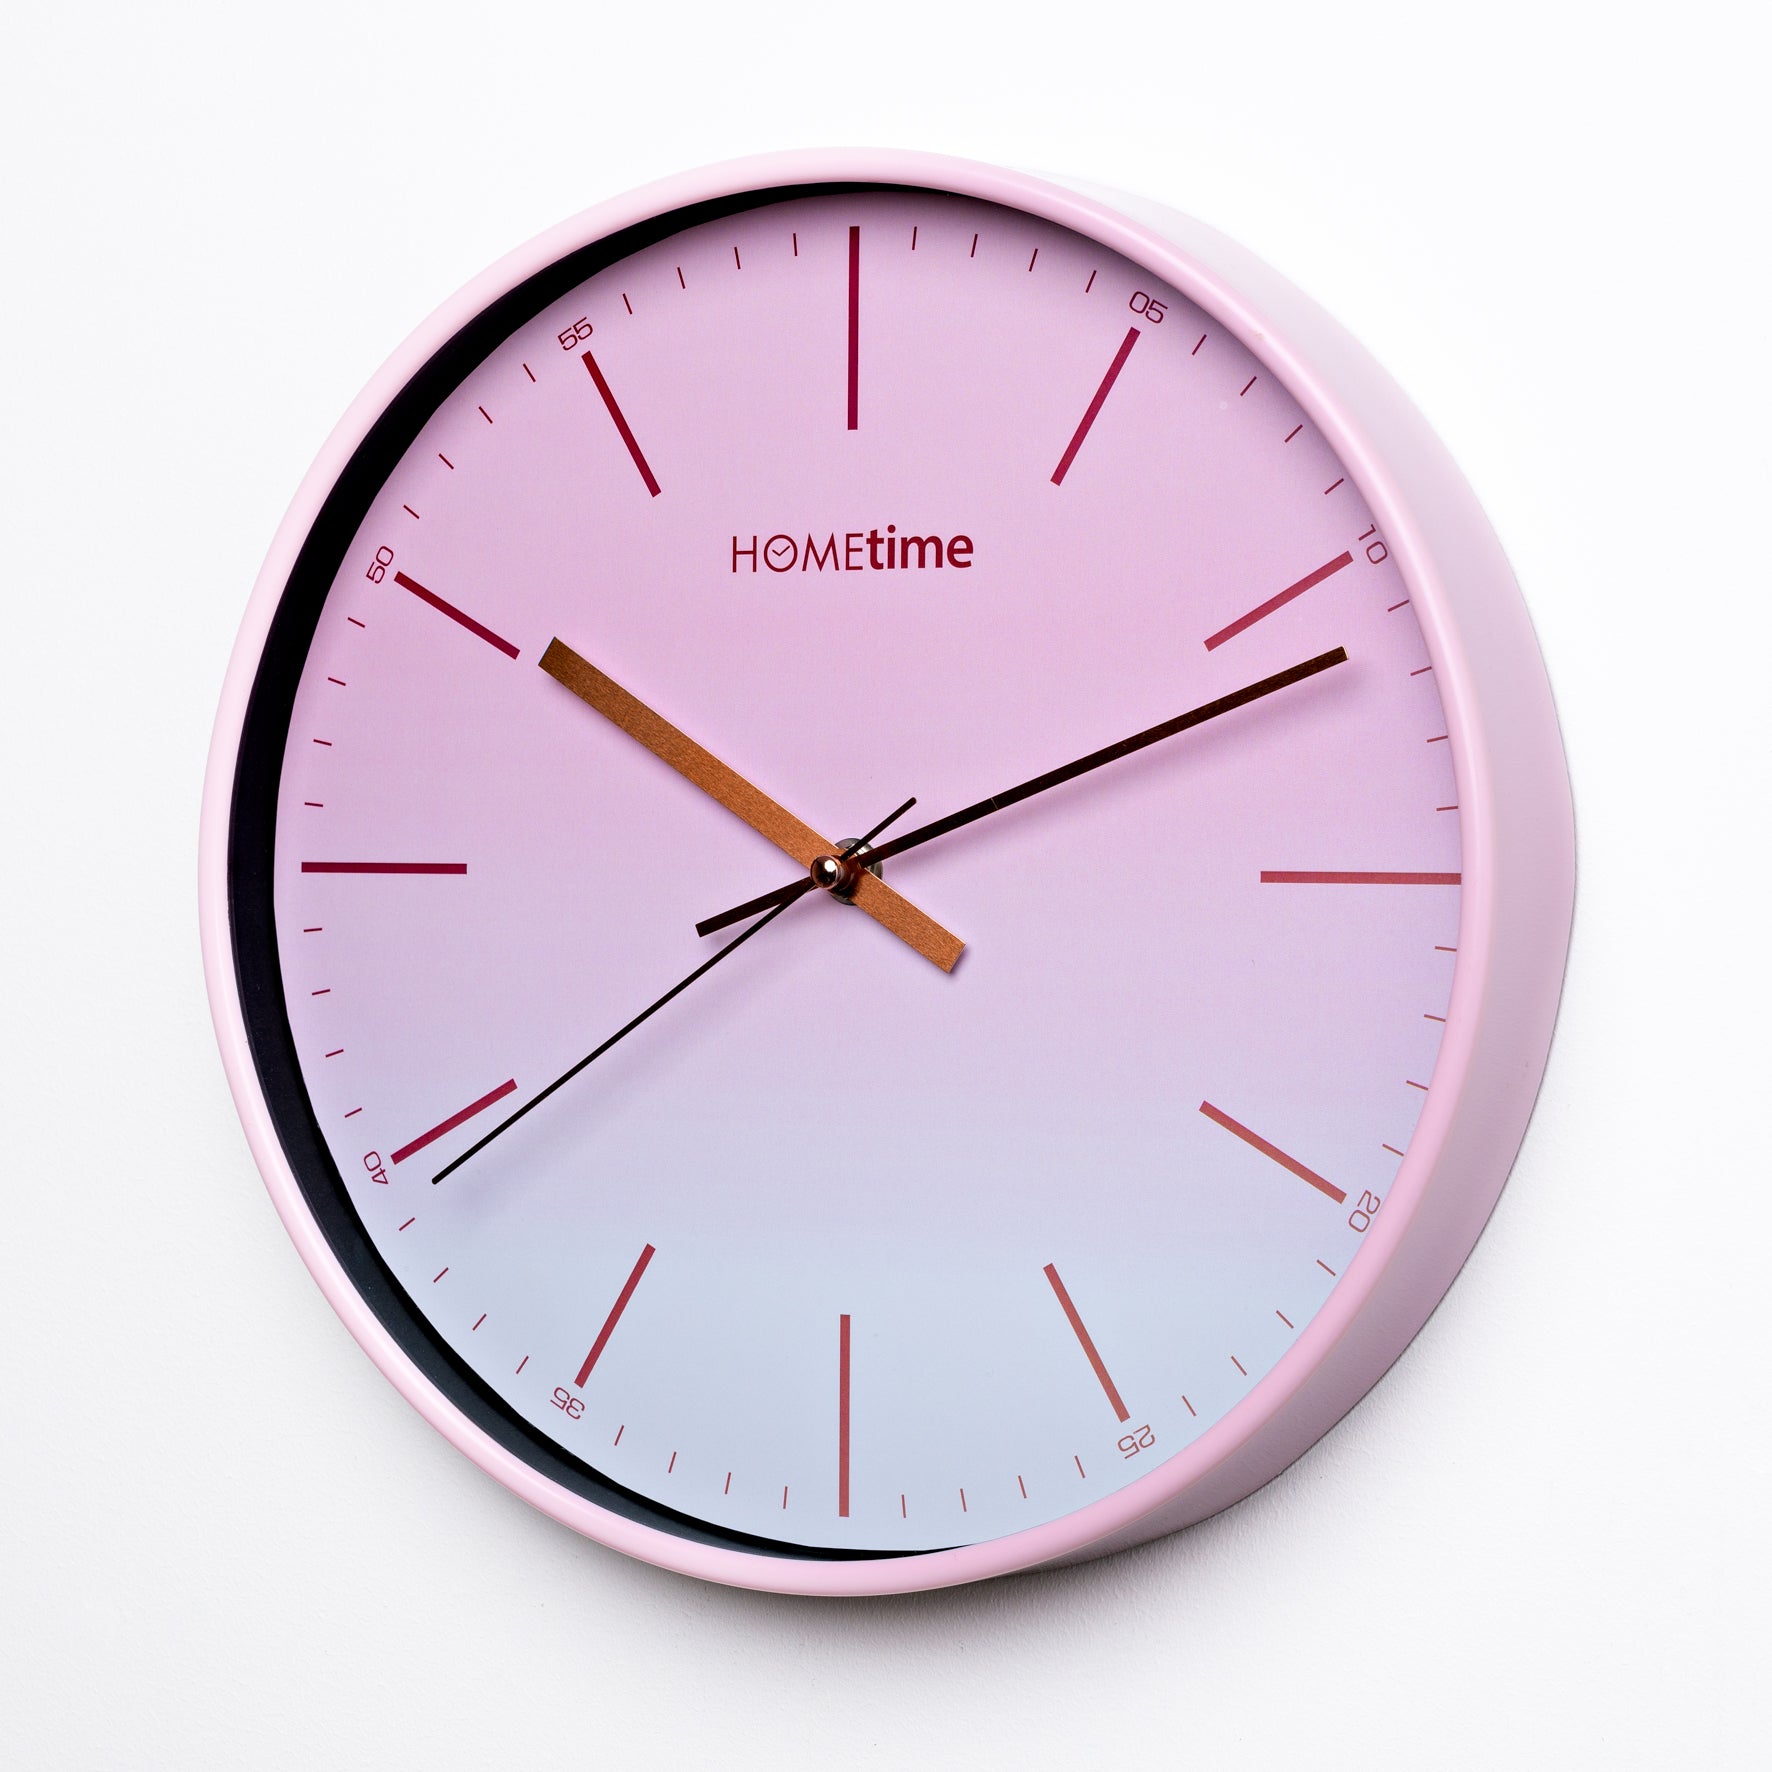 Hometime Round Wall Clock Ombre Blush Foil Numbers